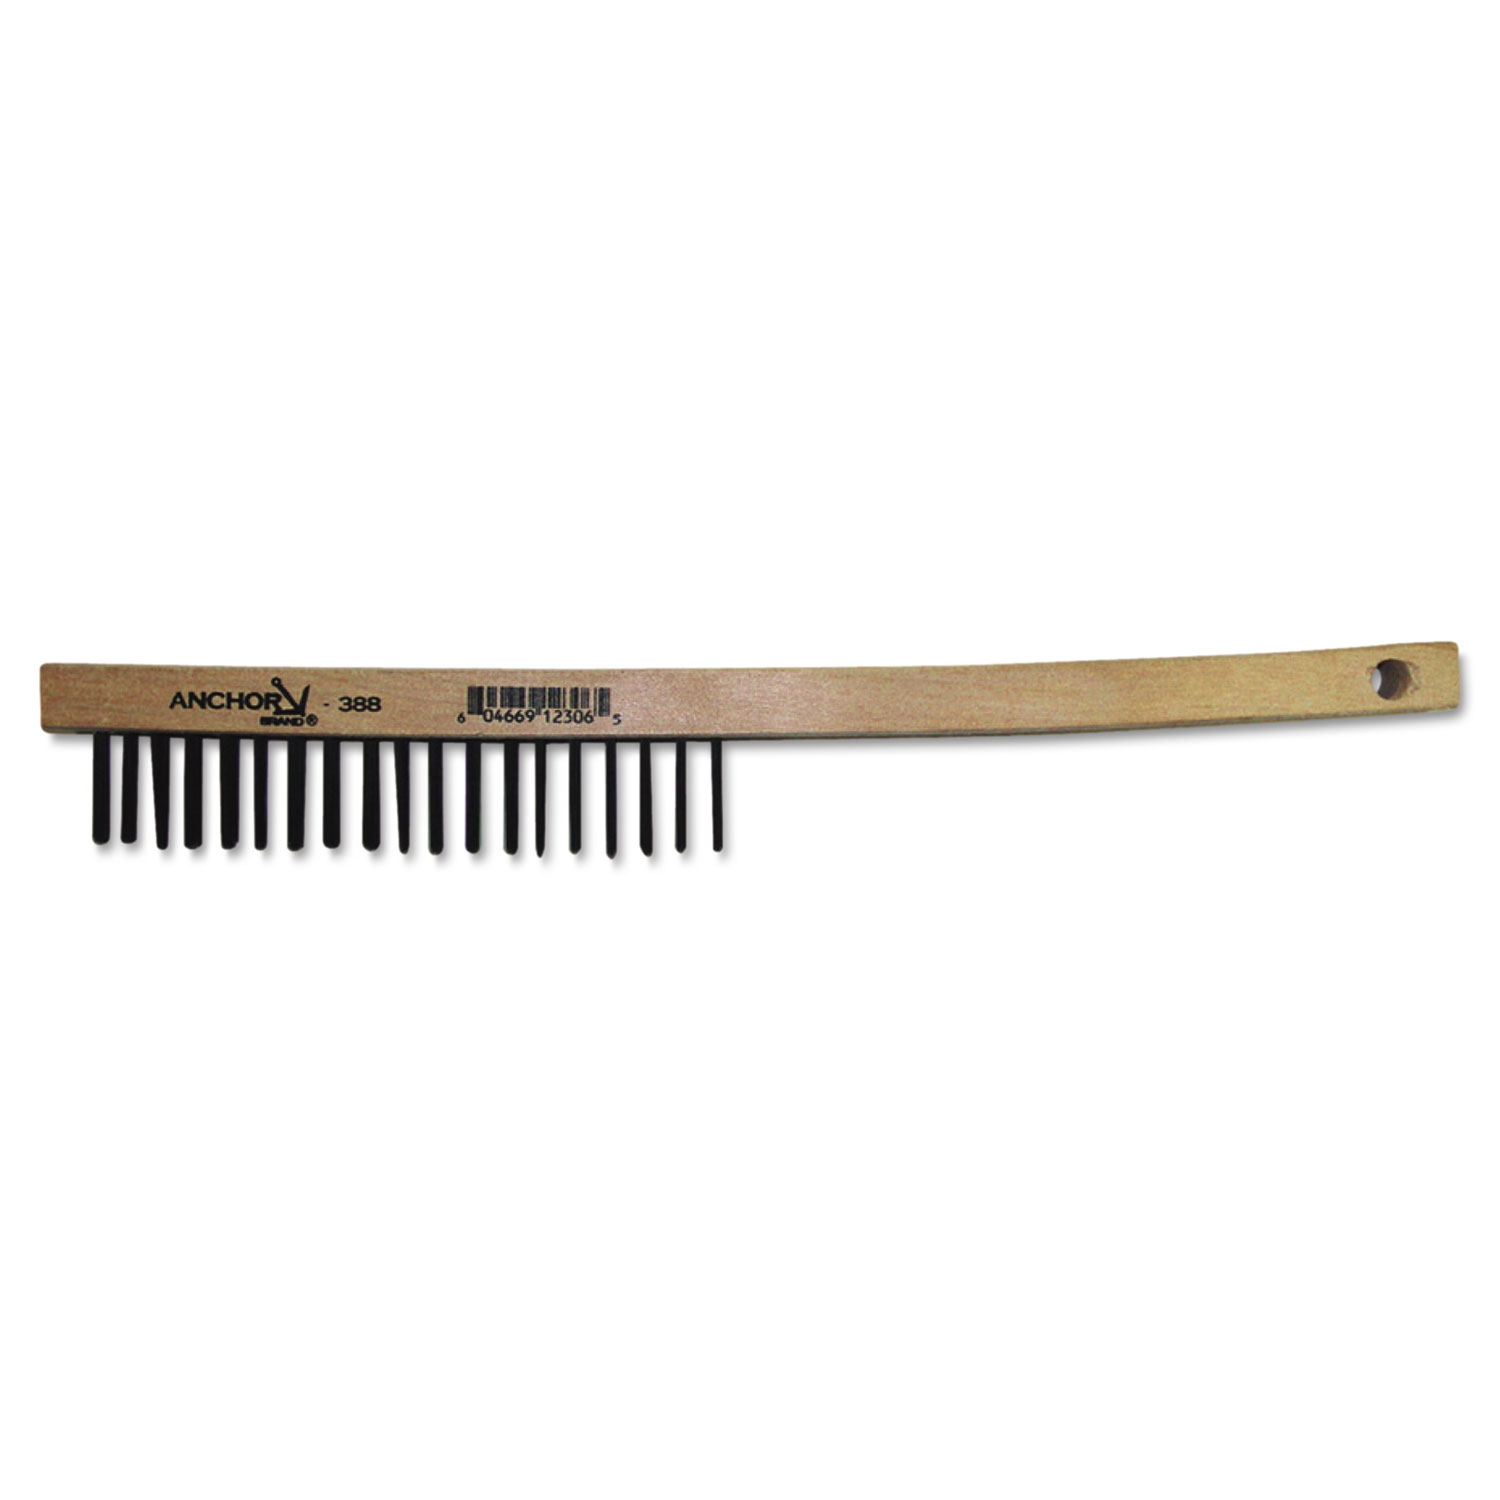 Hand Scratch Brush, Curved, Carbon Steel Shoe, Wood Handle